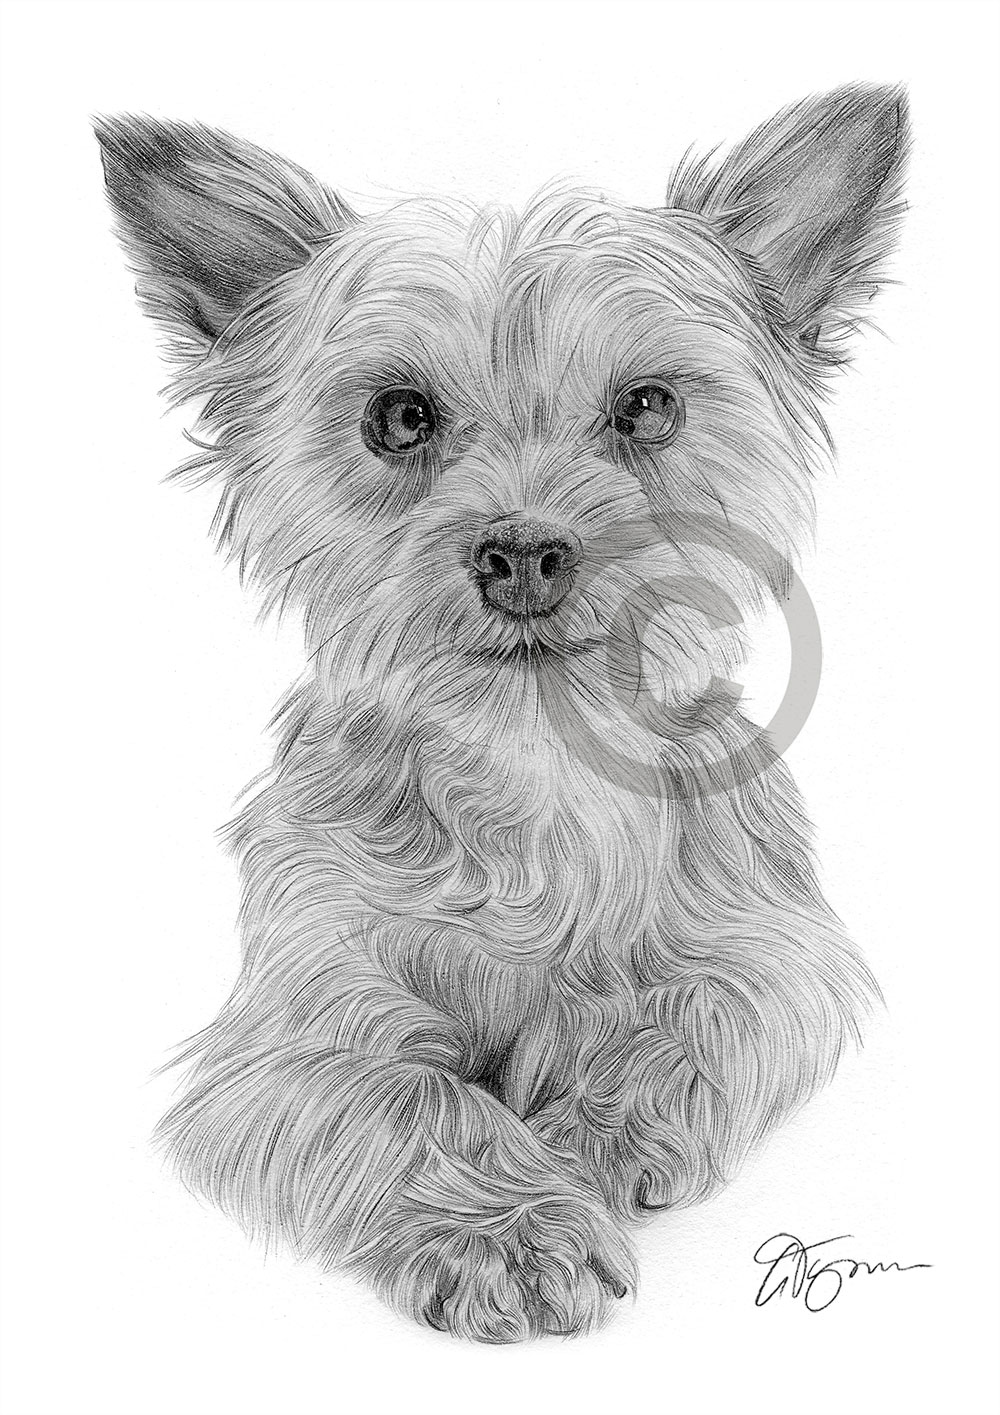 Pencil drawing of a Yorkshire Terrier puppy by UK artist Gary Tymon